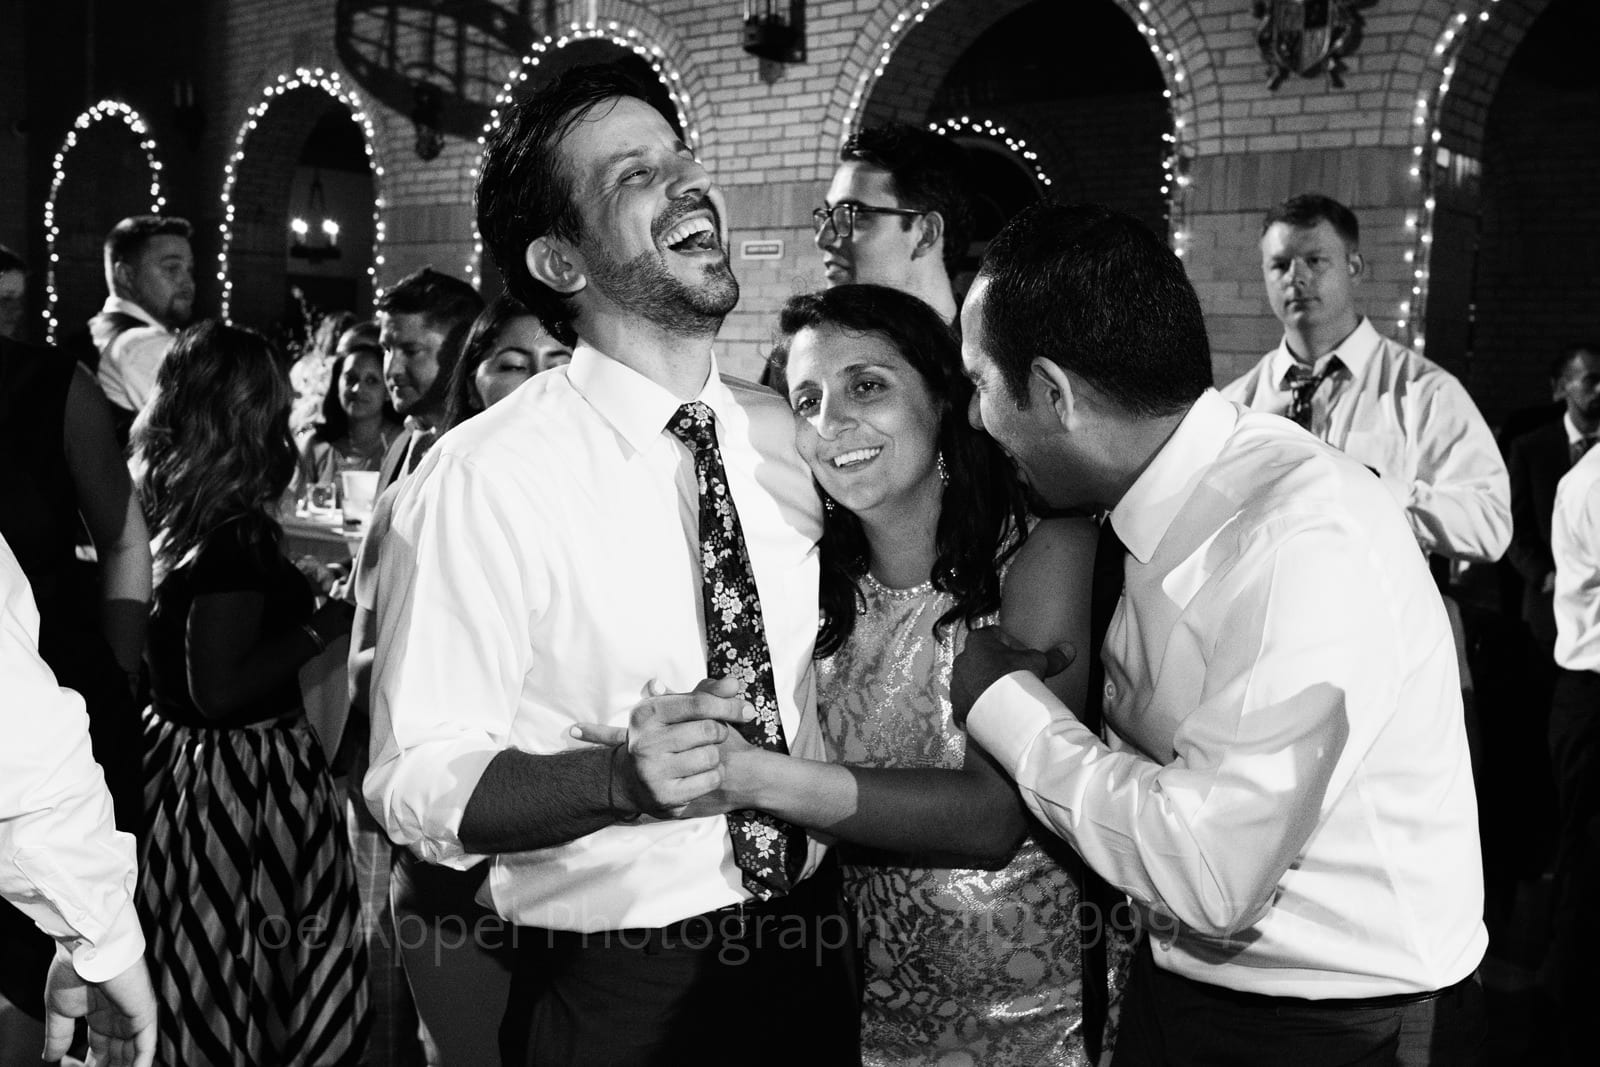 A groom in shirtsleeves laughs as he dances with his sister while another guest holds on to her and says something.